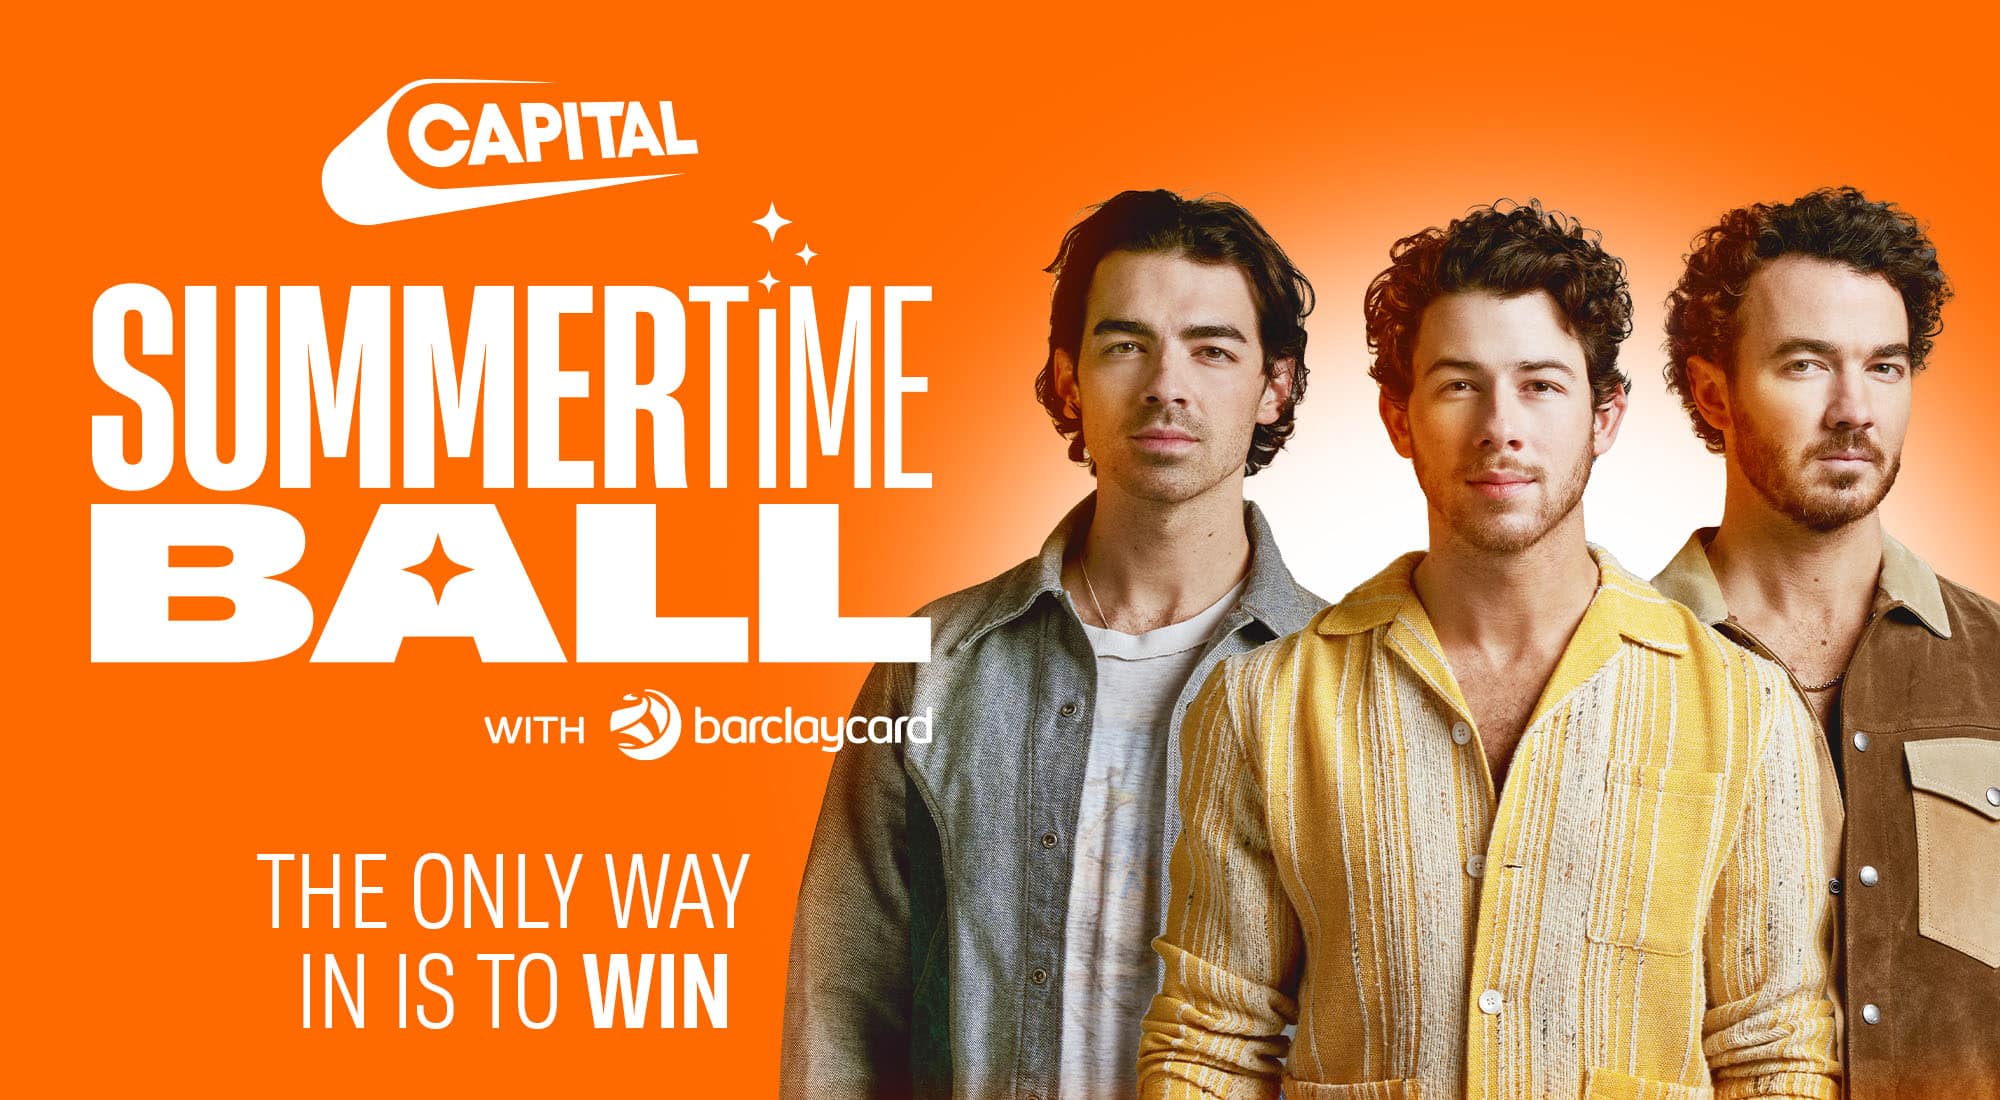 Capital’s Summertime Ball with Barclaycard is sold out! Global